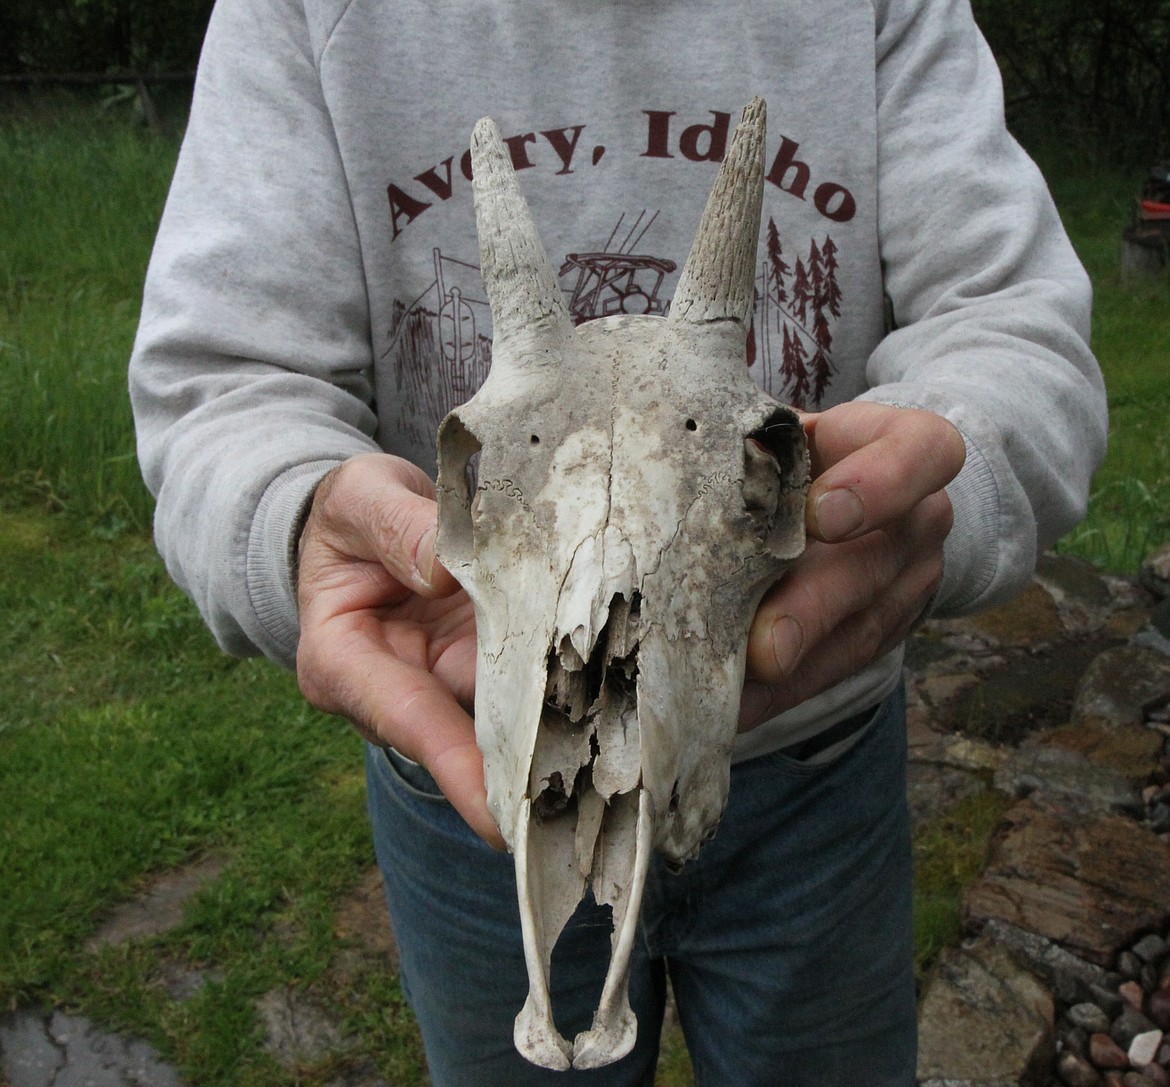 Former Avery postmaster and Forest Service hydrologist Wade Bilbrey holds a mountain goat skull he found in the St. Joe River area.